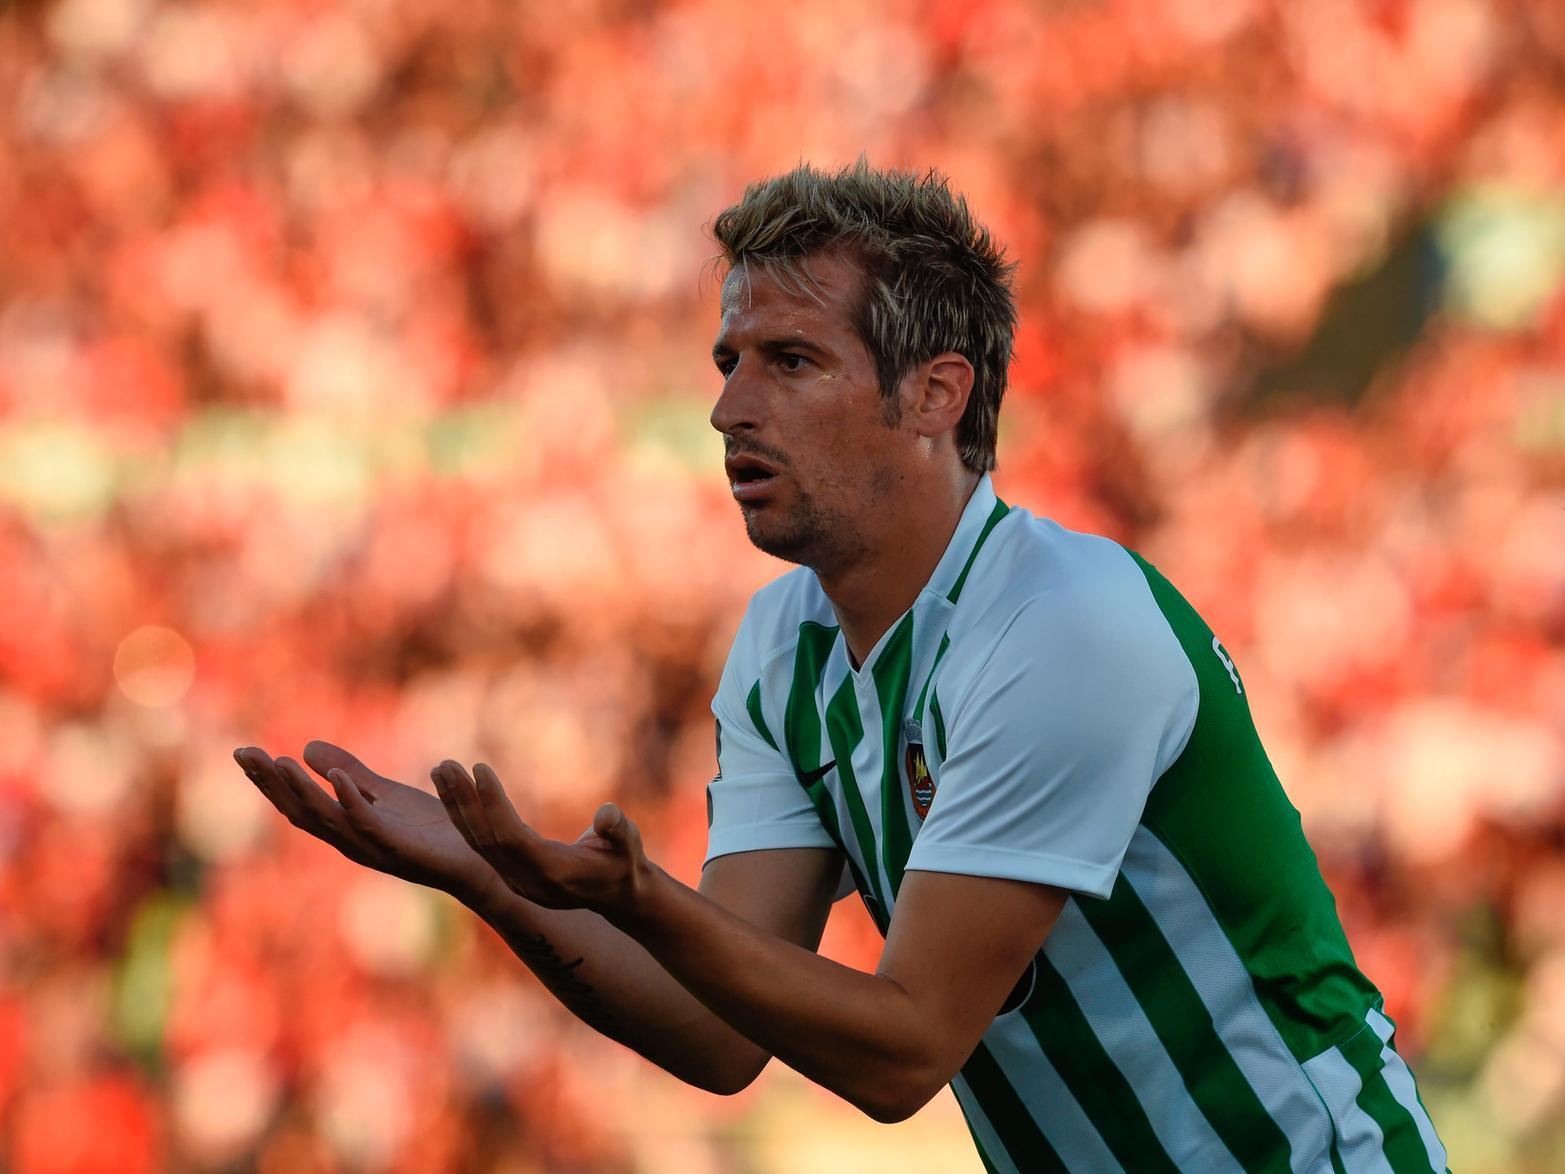 At just 31-years-old the ex-Real Madrid and Portugal international left-back has time left to resurrect his career after leaving Rio Ave. Wage demands may put some Premier League clubs off, however.